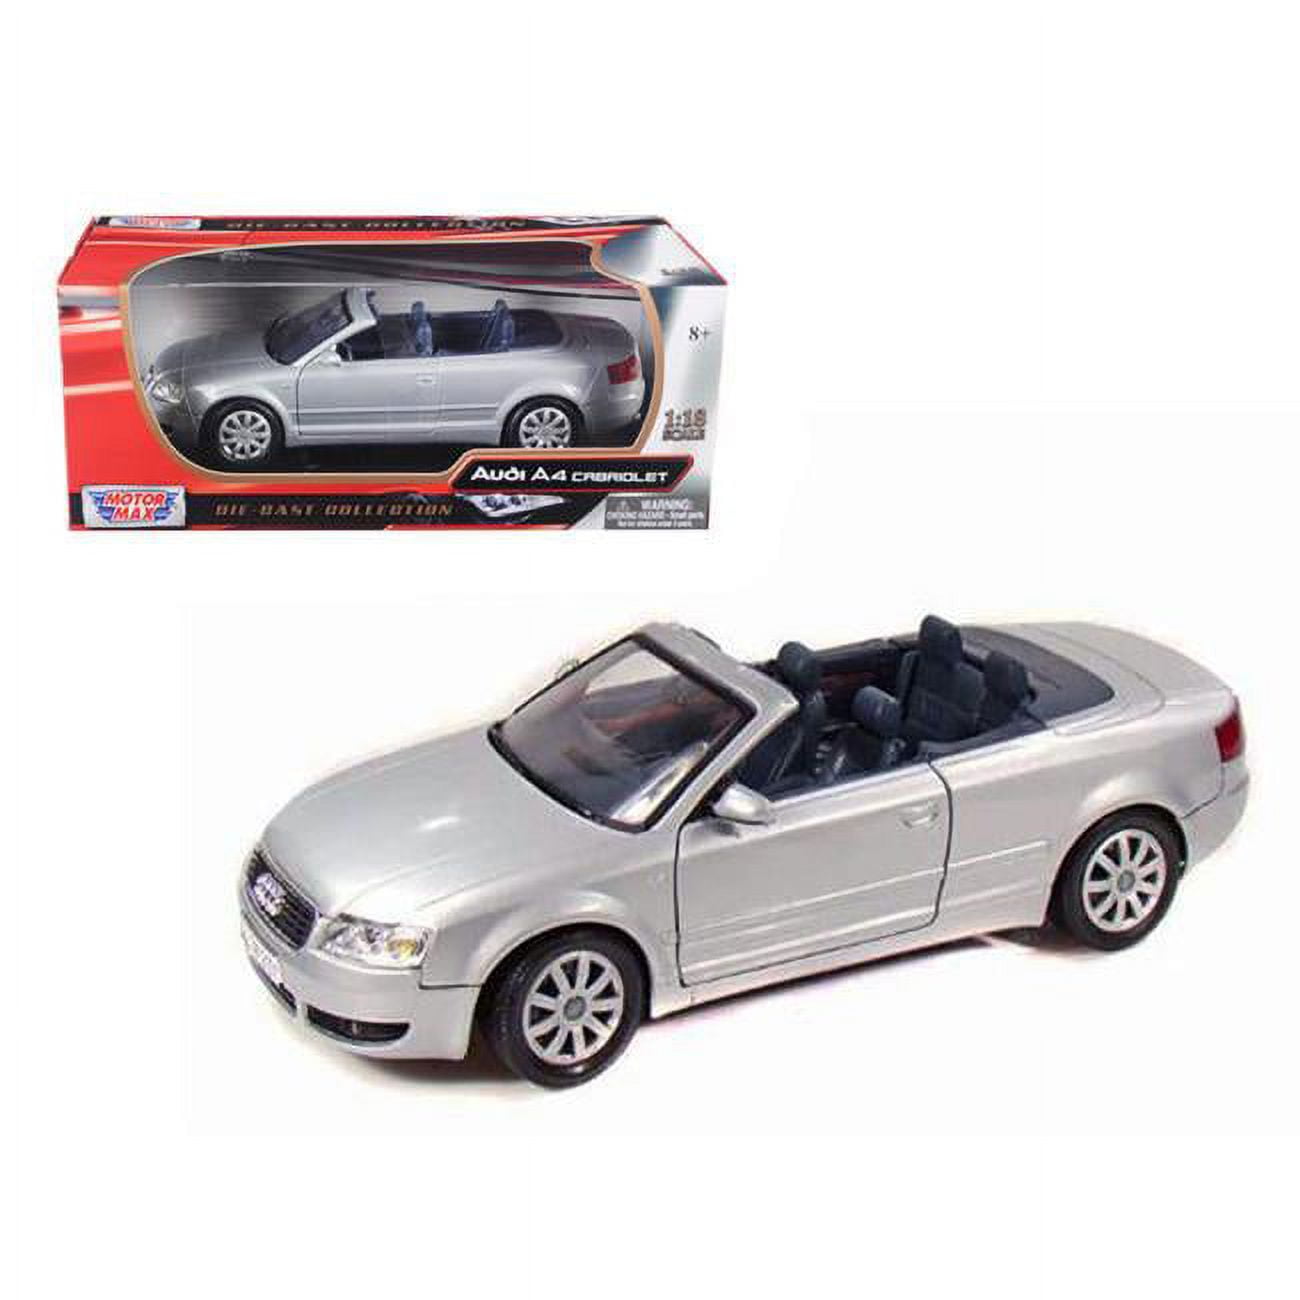 73148s 1 By 18 2004 Audi A4 Convertible Diecast Model Car, Silver